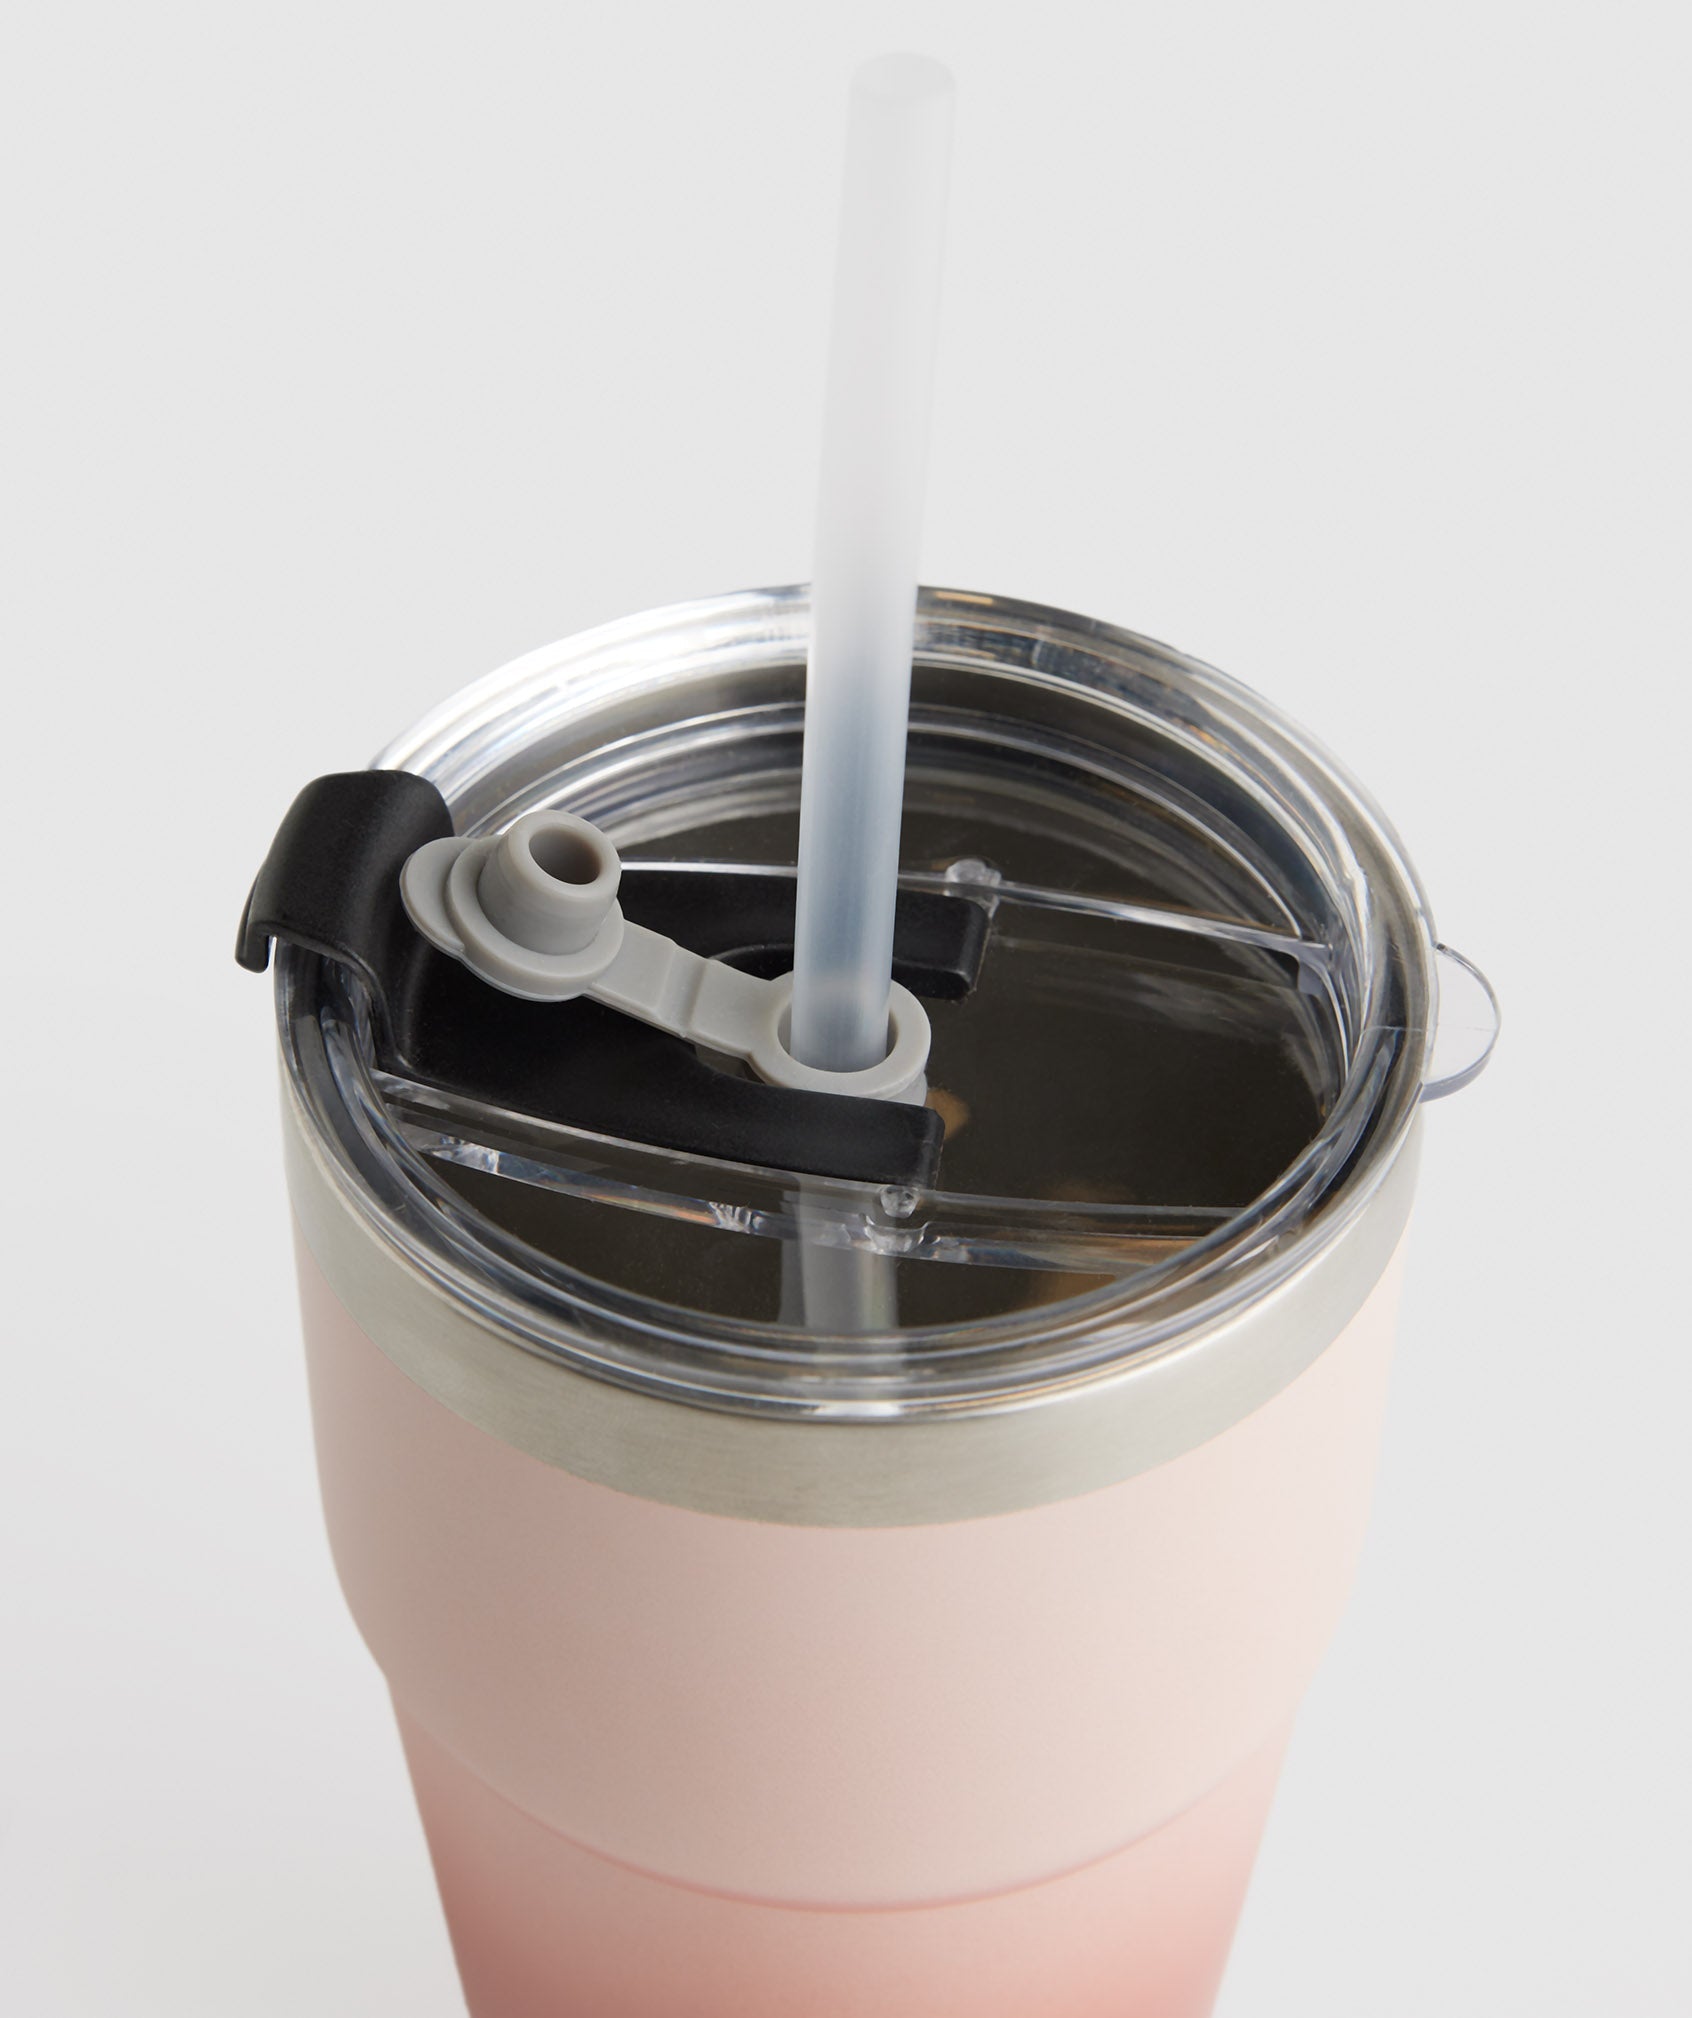 Insulated Straw Cup in Misty Pink/Terracotta Pink